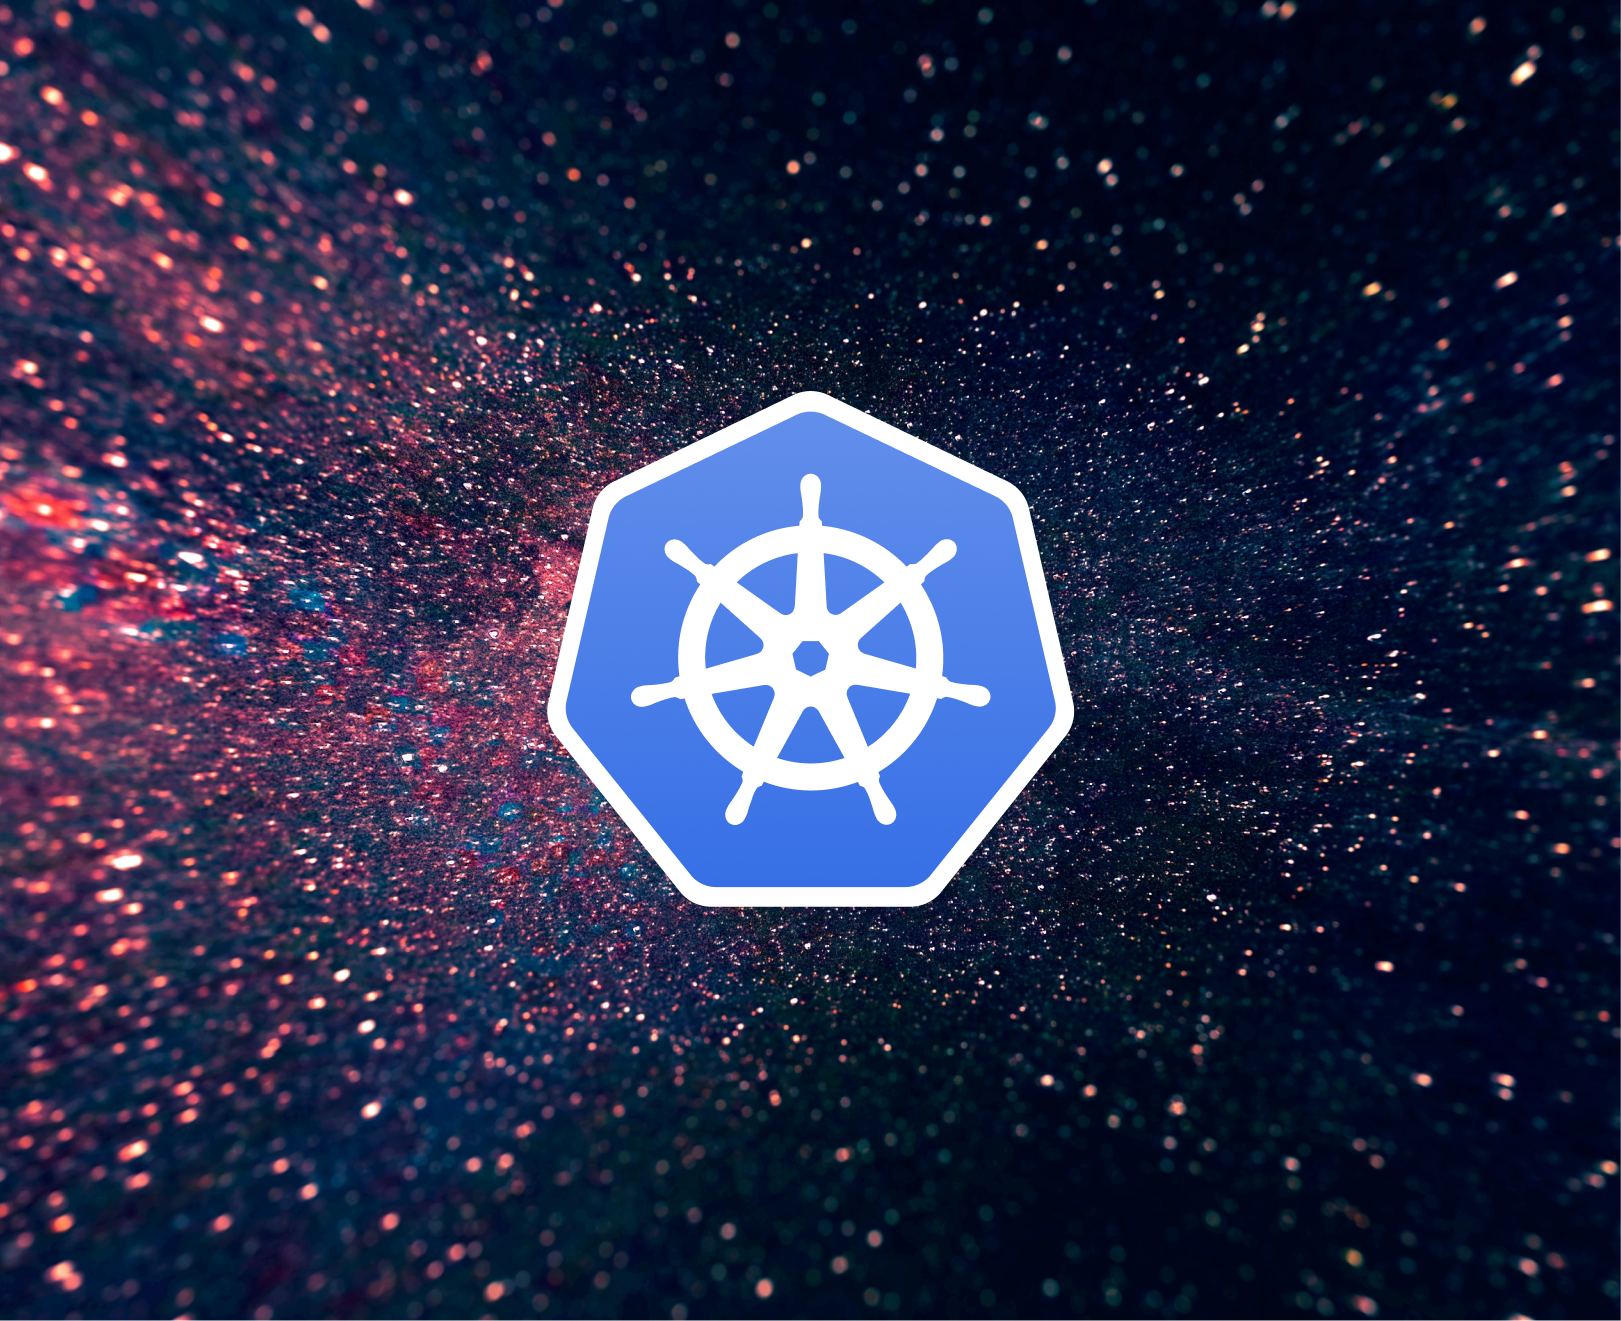 How to use Kubernetes components